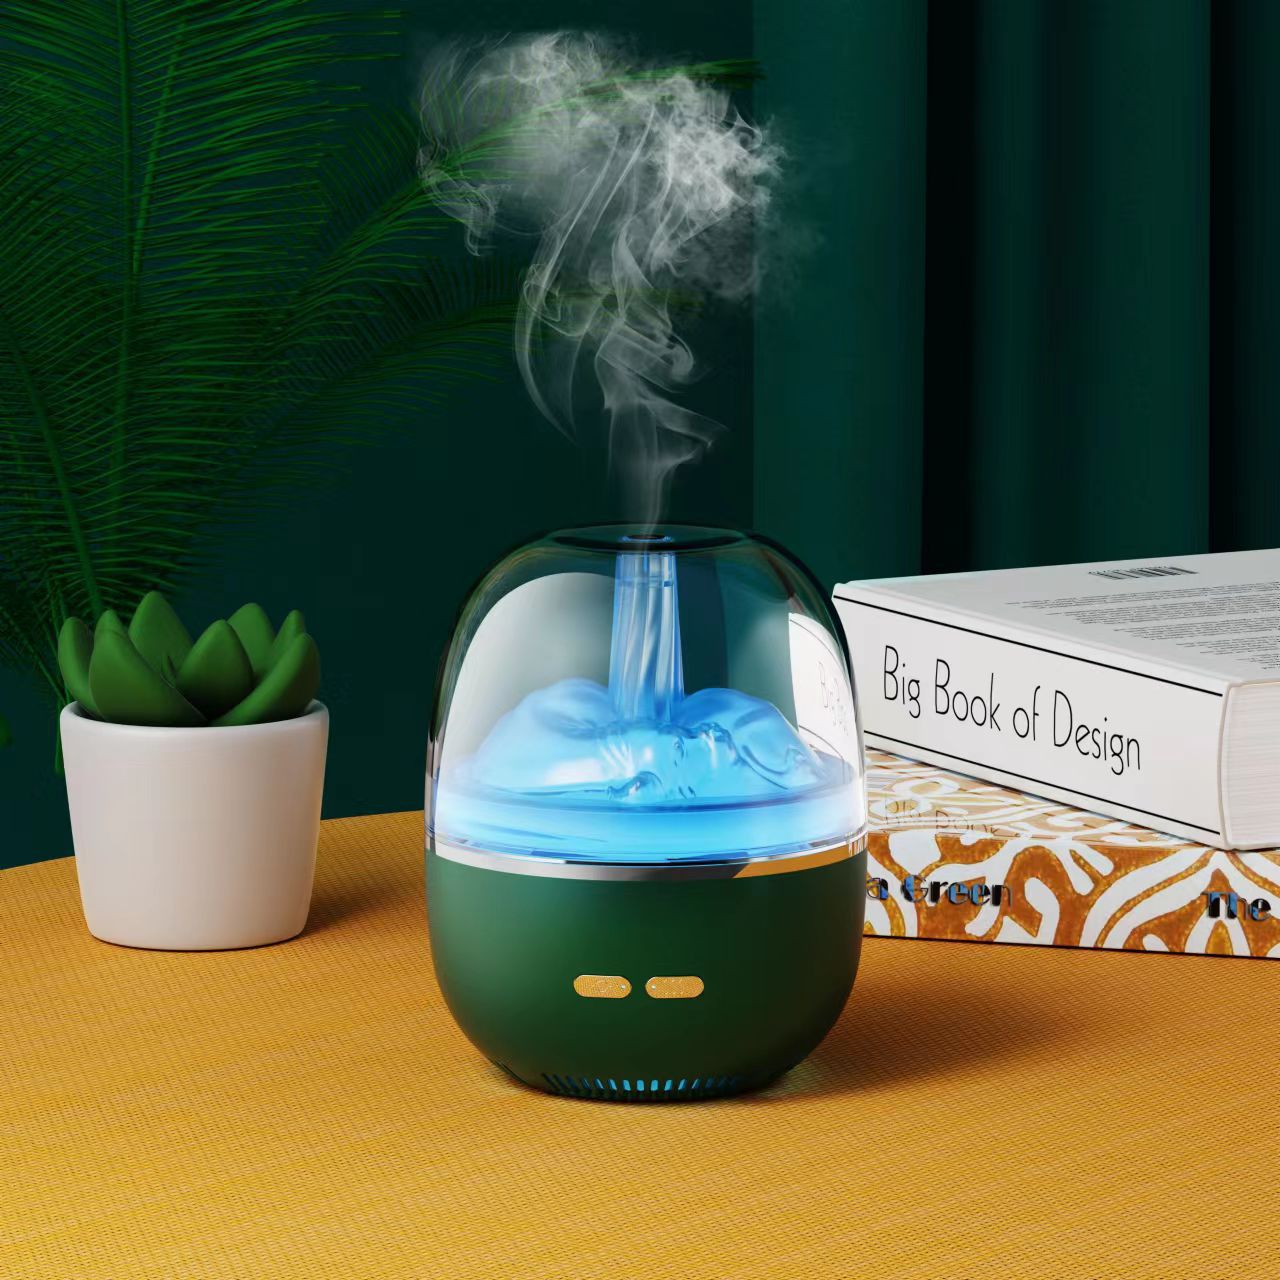 Ultrasonic Aromatherapy Humidifier - The Essential Oil Boutique, Essential Oil Diffuser, Essential Oil, aroma, aromatherapy, diffuser, scent,  essential oils, humidifier, mist, portable, best diffusers for home, flame aroma diffuser, usb diffuser, mushroom diffuser,  aroma humidifier, small diffuser, wood diffuser, car essential oil diffuser, aroma essential oil diffuser